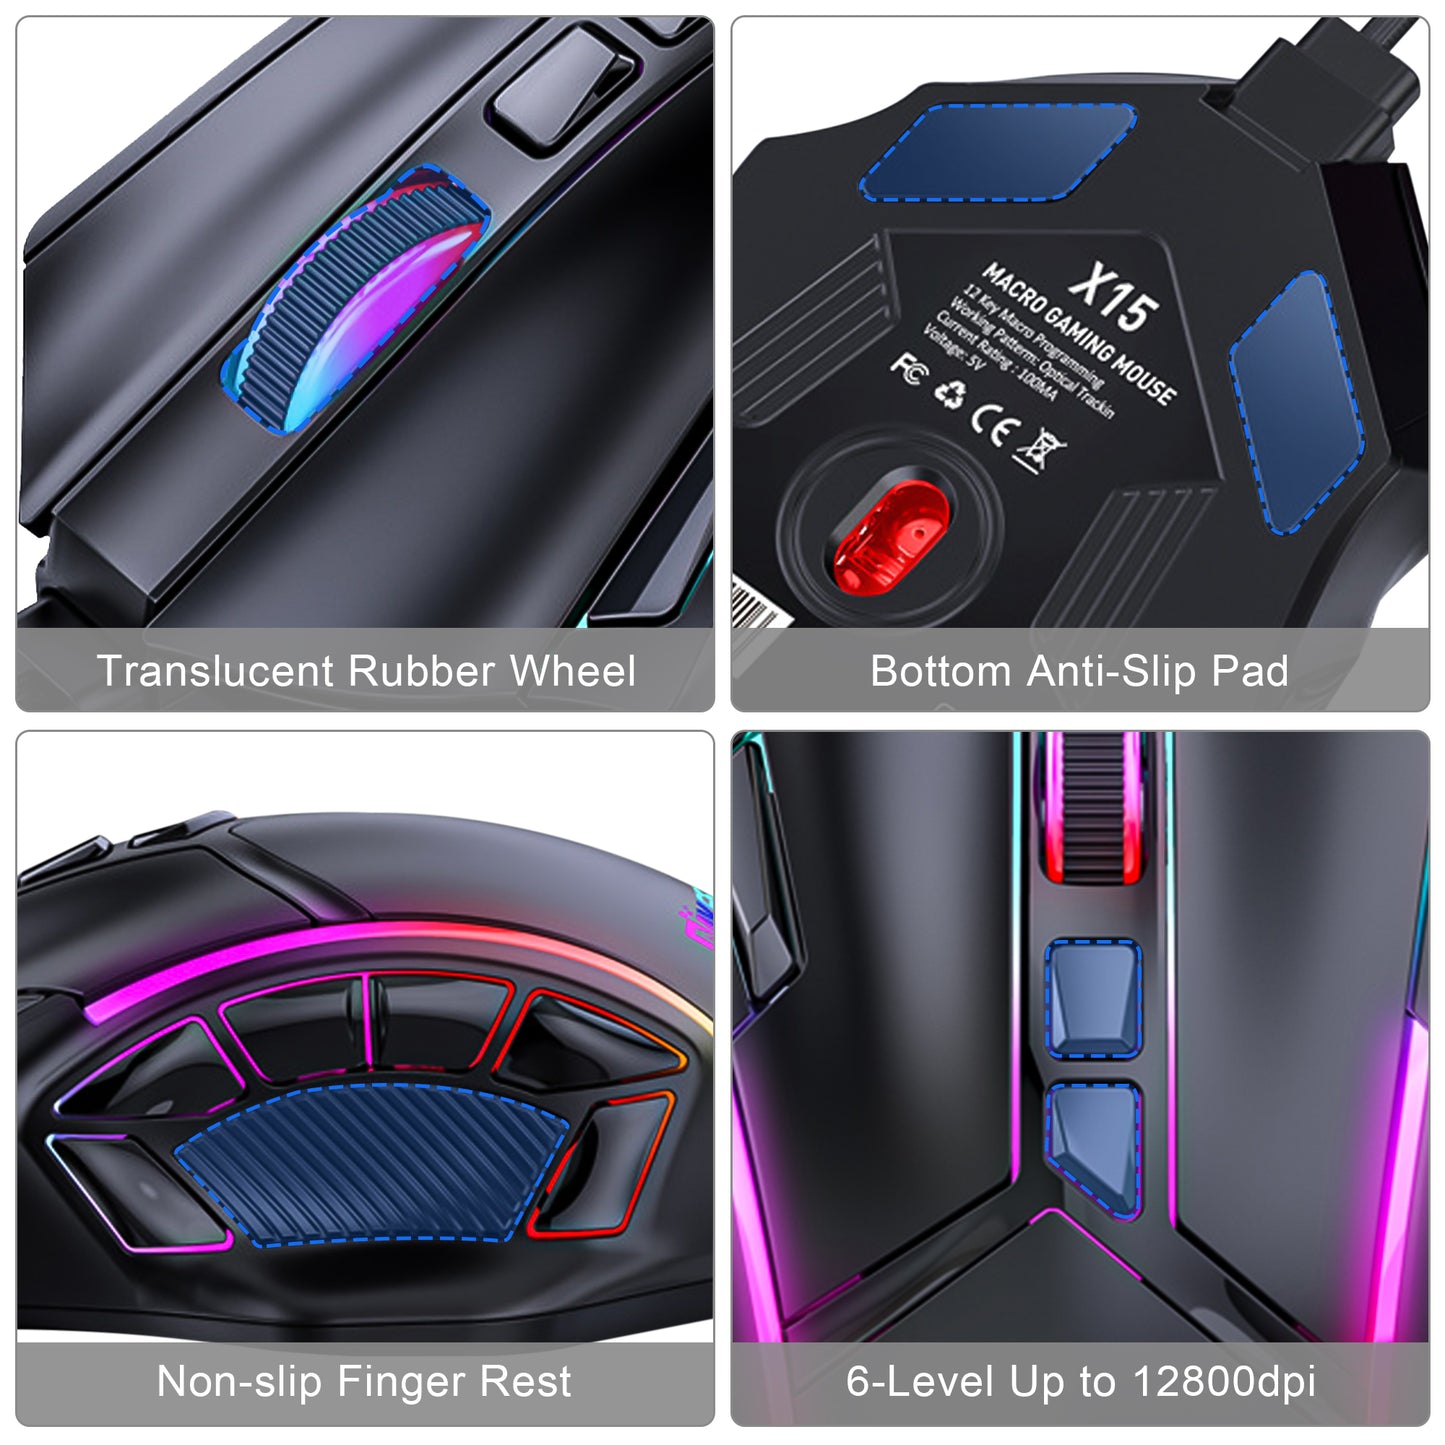 RGB USB Wired 12 Programmable Buttons Gaming Mouse - Computer/PC Mice with Up to 12800 DPI 6 Adjustable DPI with 13 RGB Light Modes (Black)